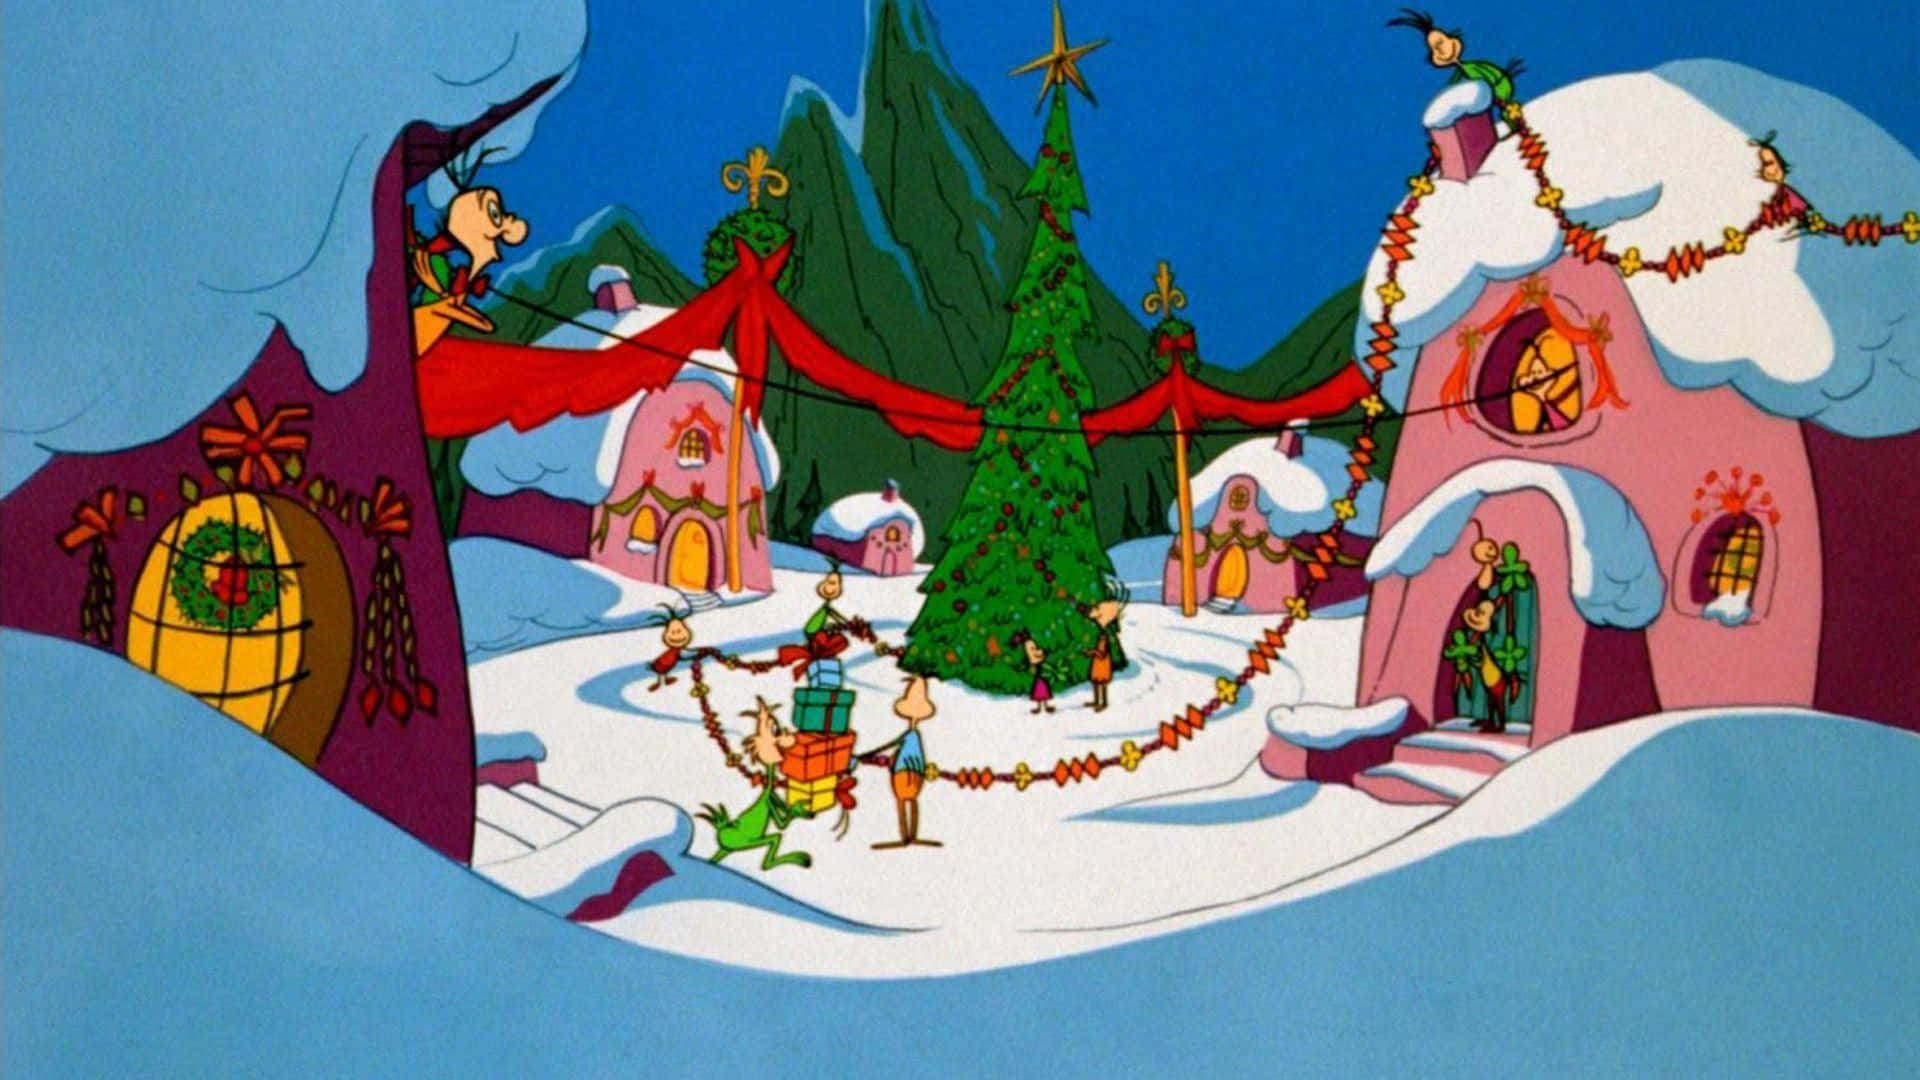 Download Liven up your Zoom meetings with this nostalgic Grinch-themed  virtual background! 